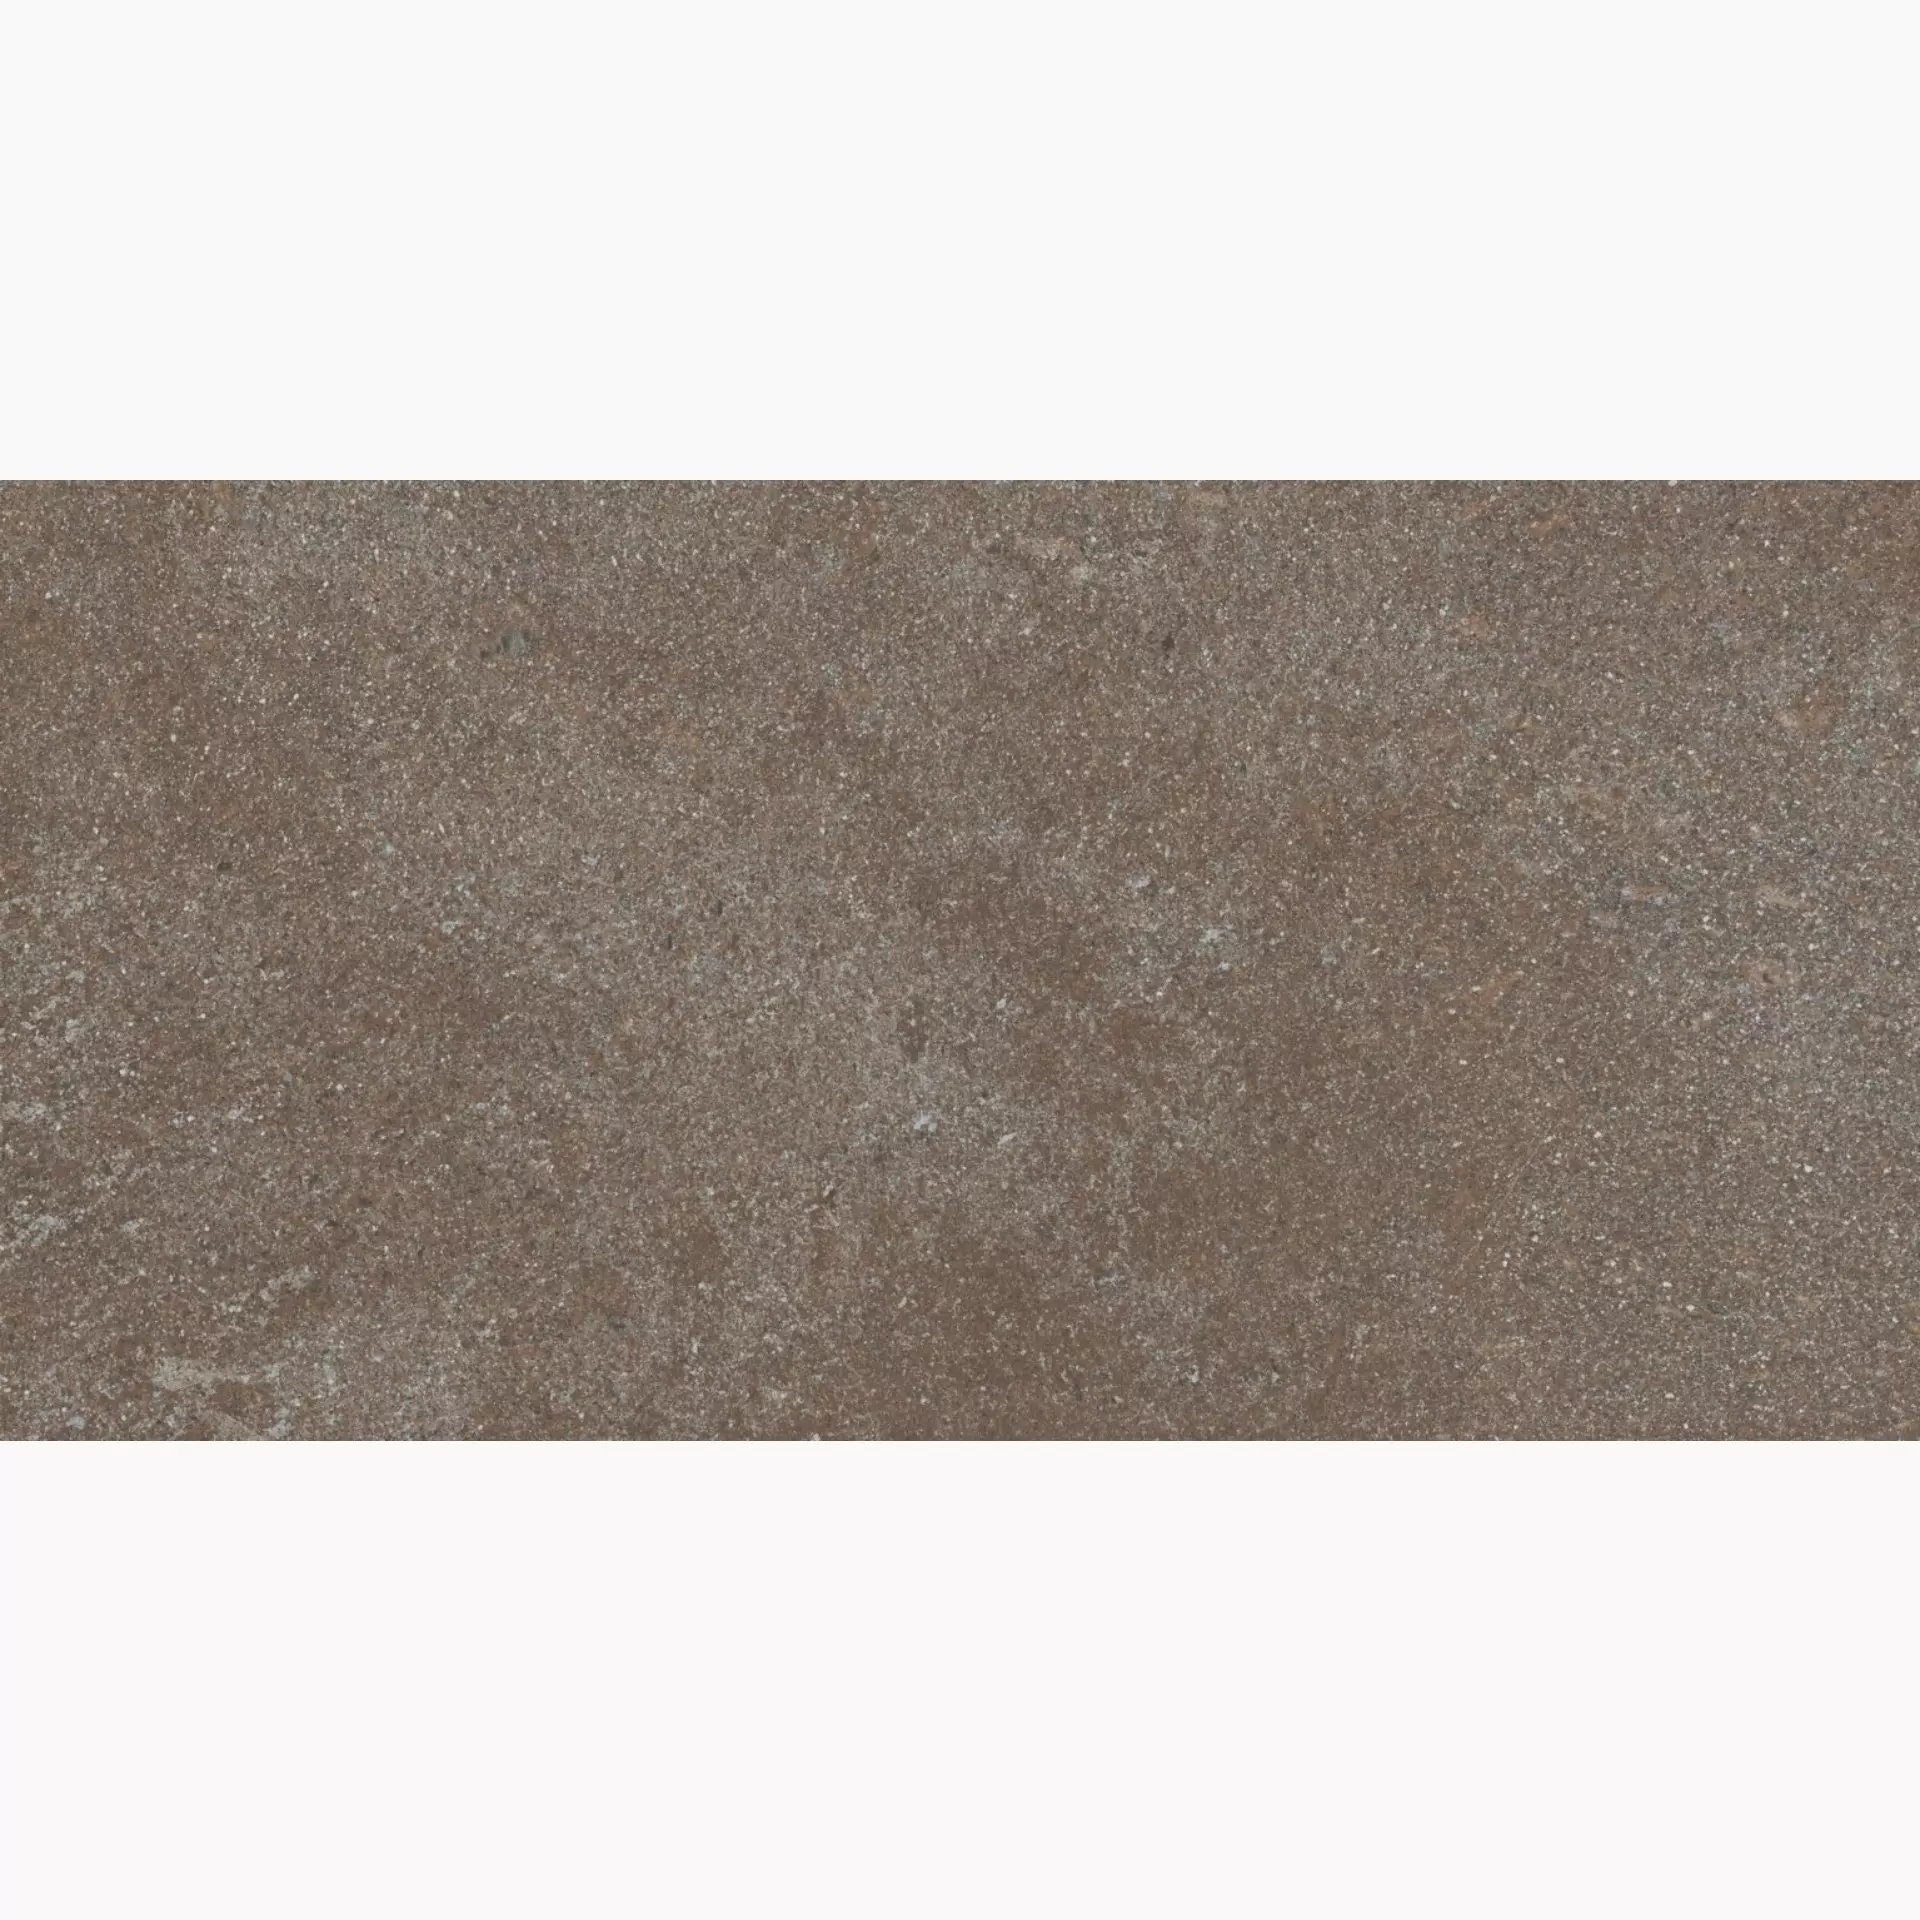 ABK Native Red Naturale PF60003904 60x120cm rectified 8,5mm